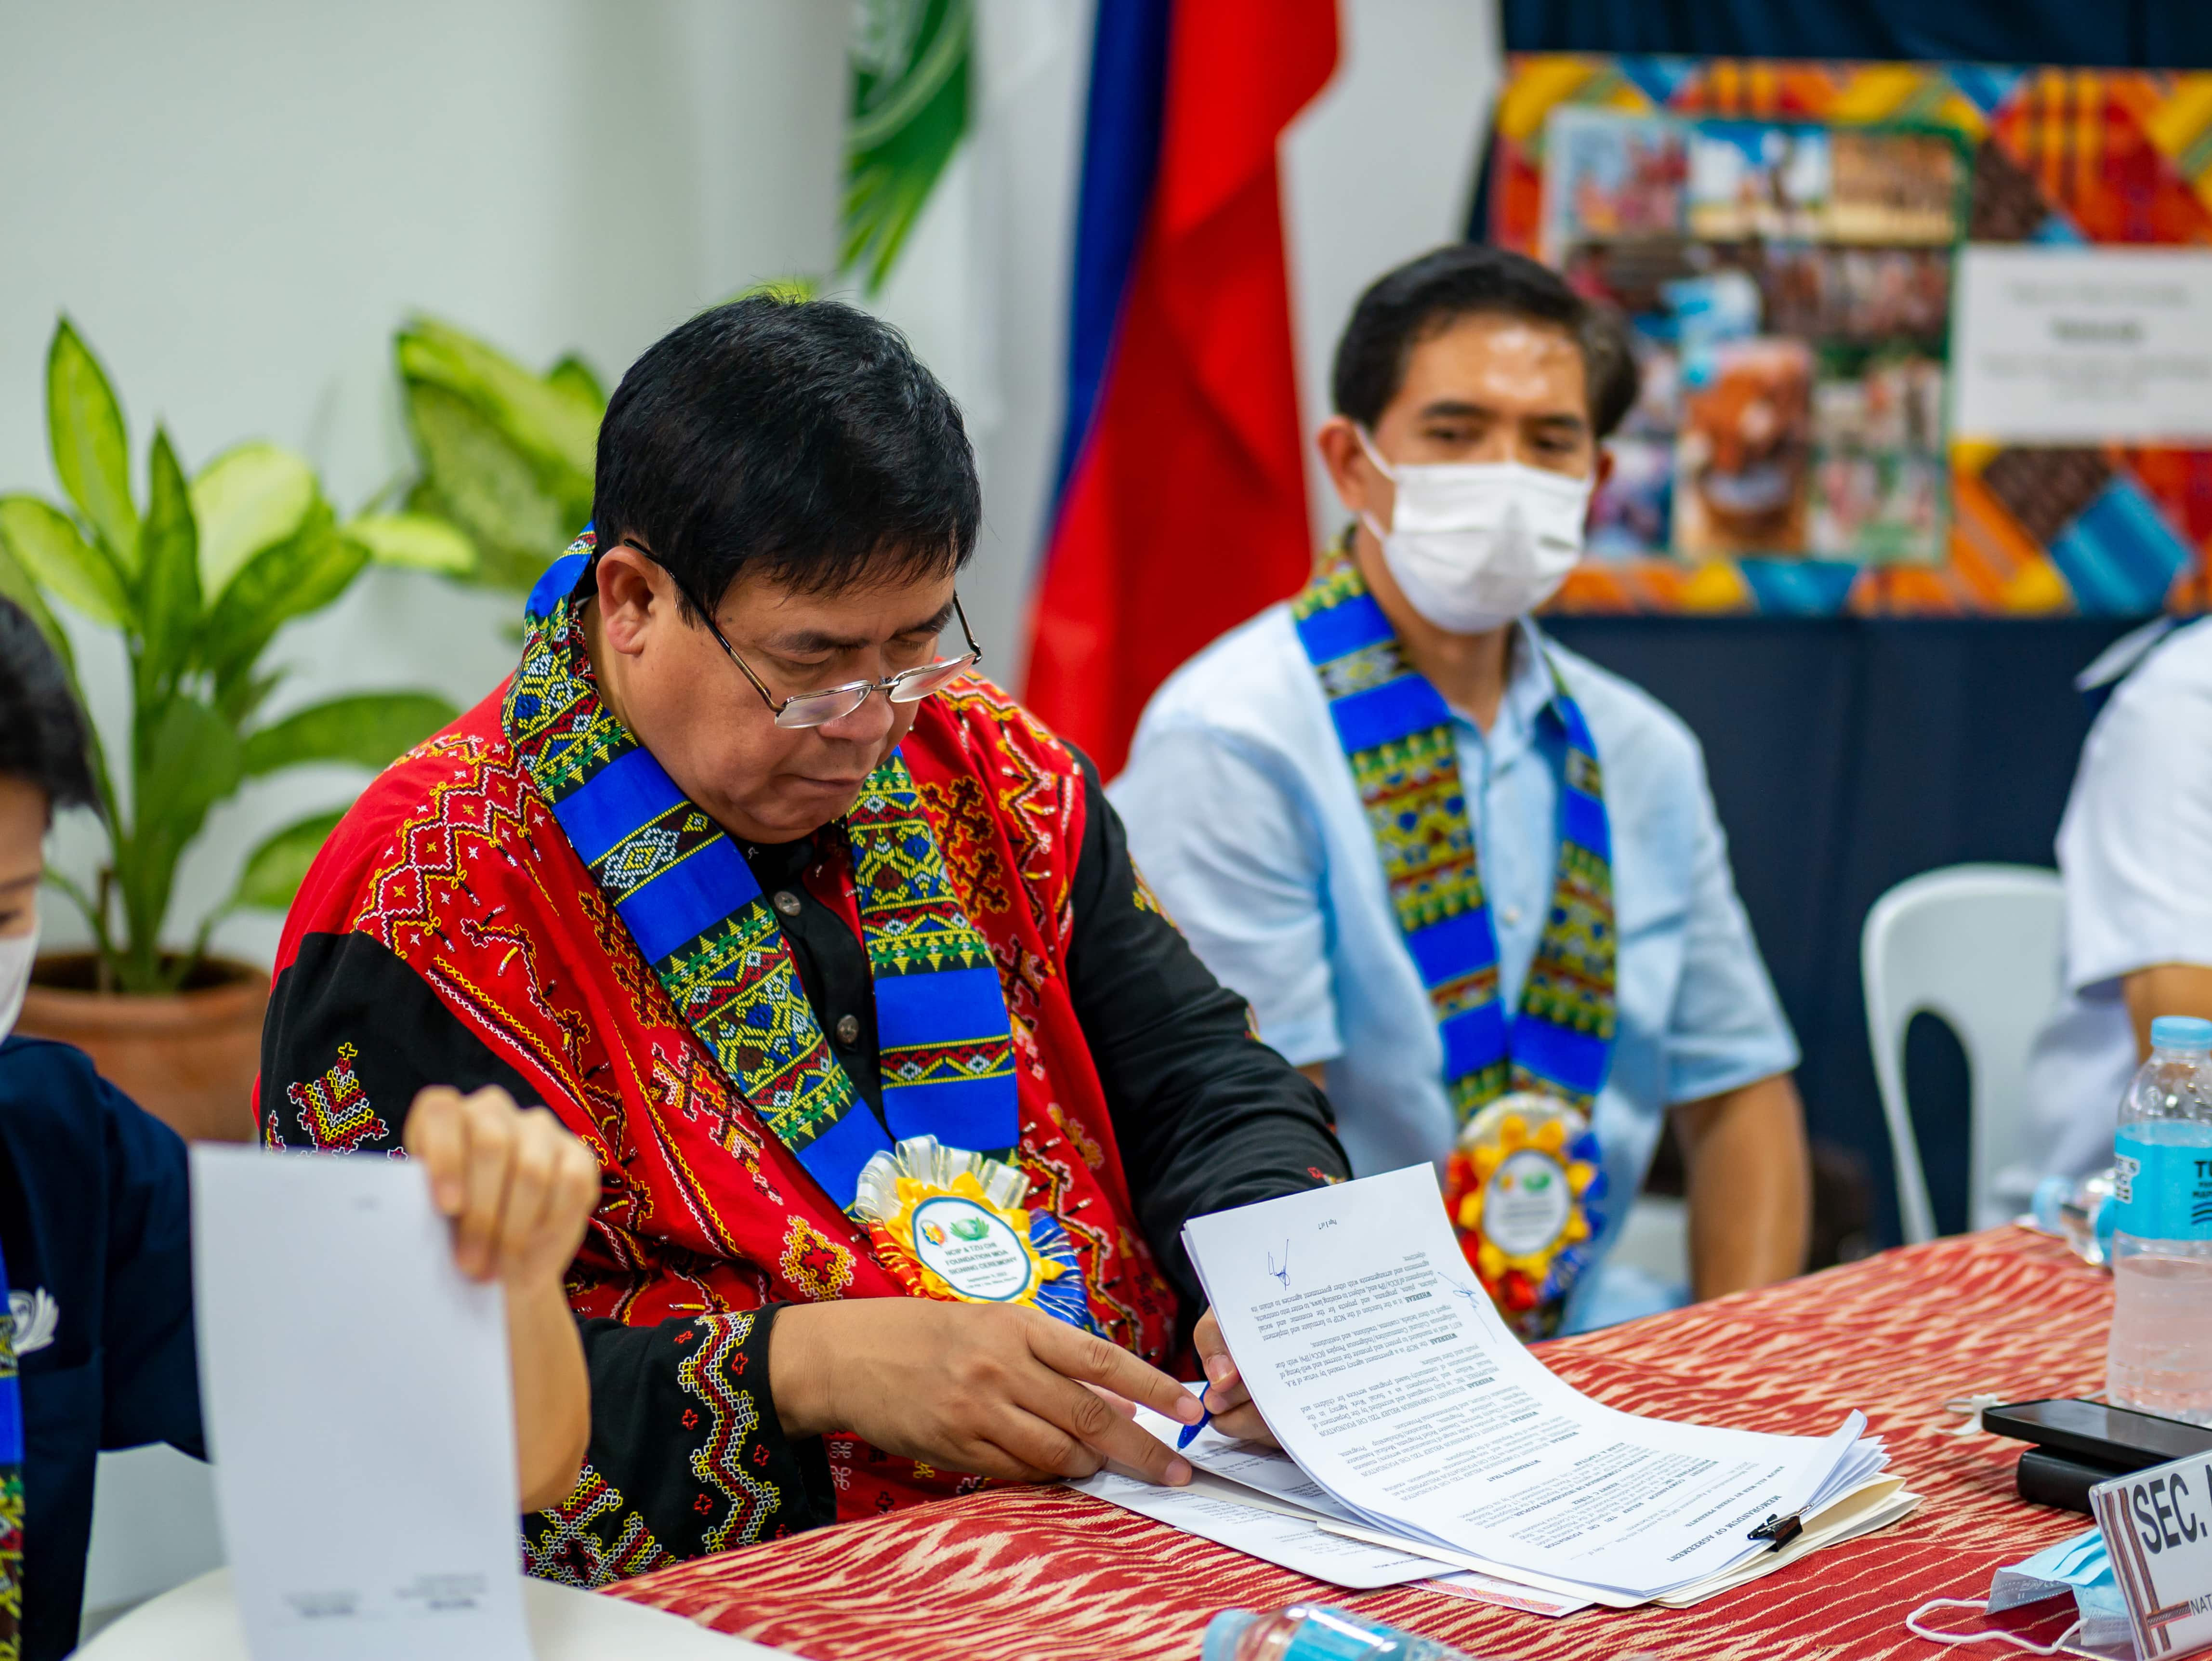 Signing of the MOA, Chairperson Allen Capuyan, and Honorable Commissioner Gaspar Cayat overseeing.【Photo by Daniel Lazar】